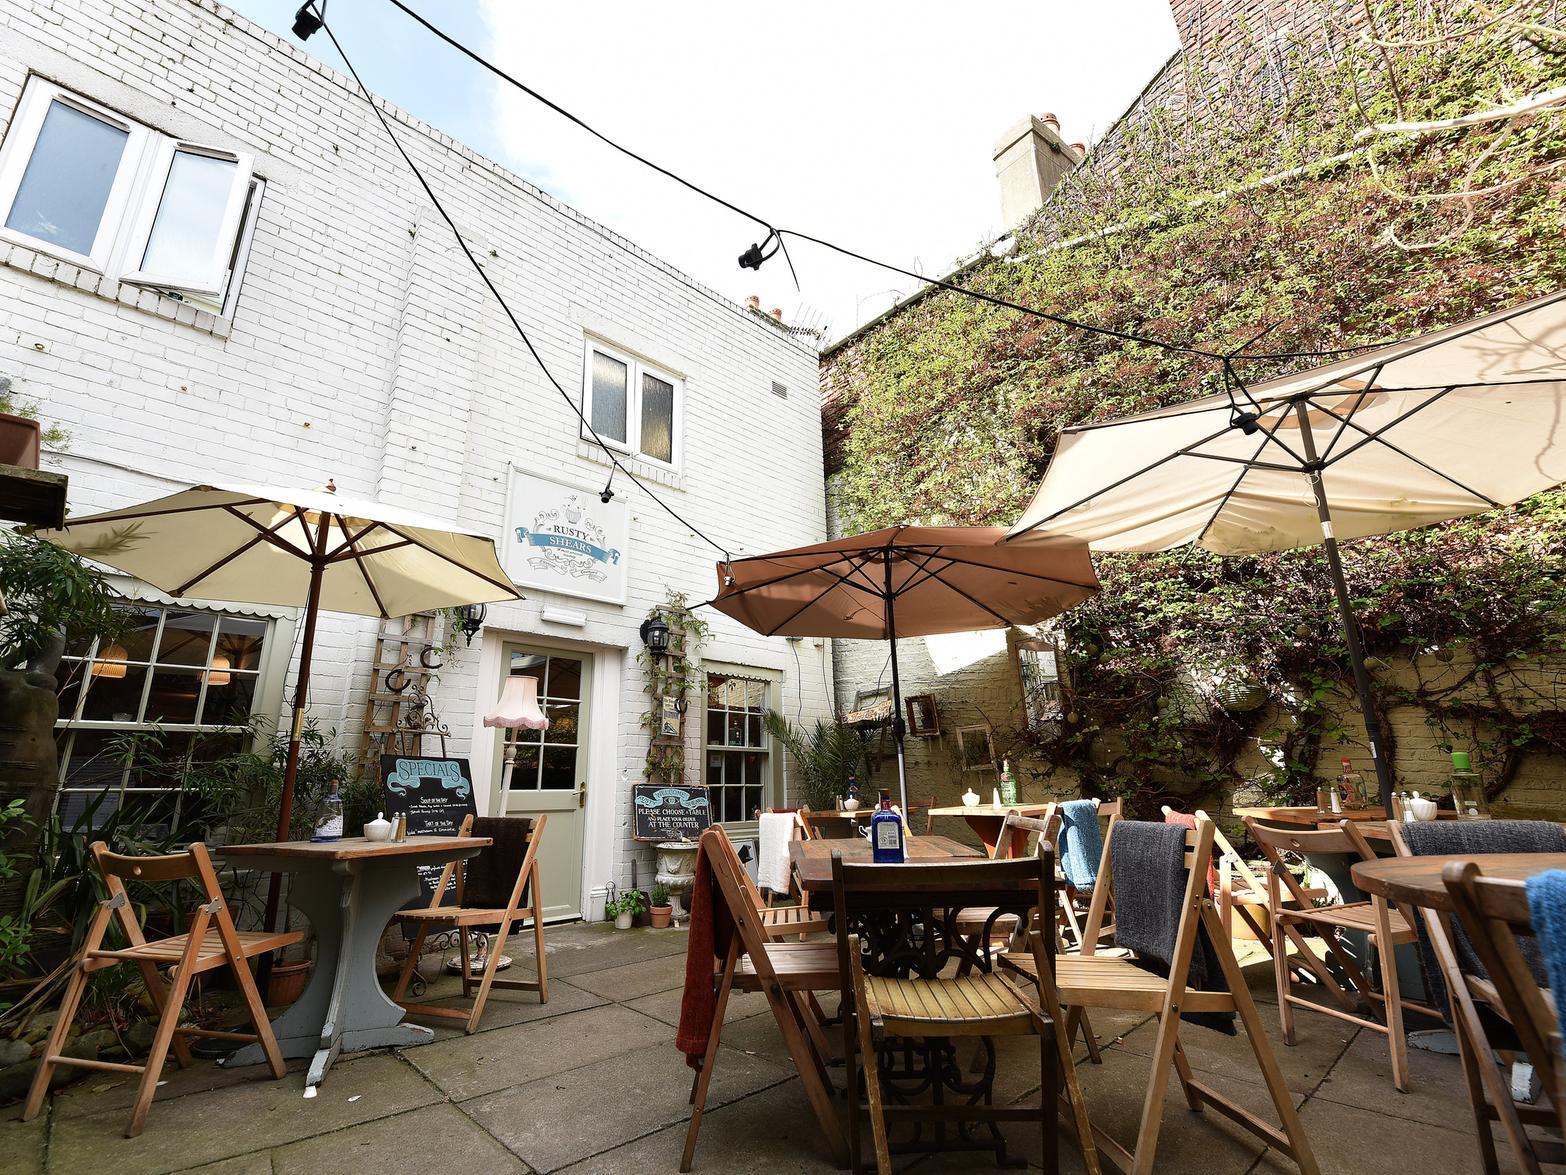 A reviewer said:
Blink and you'll miss it, but go down the passageway to find a hidden courtyard and a quirky cafe service good coffee and interesting cakes and foods - and it's dog friendly too!